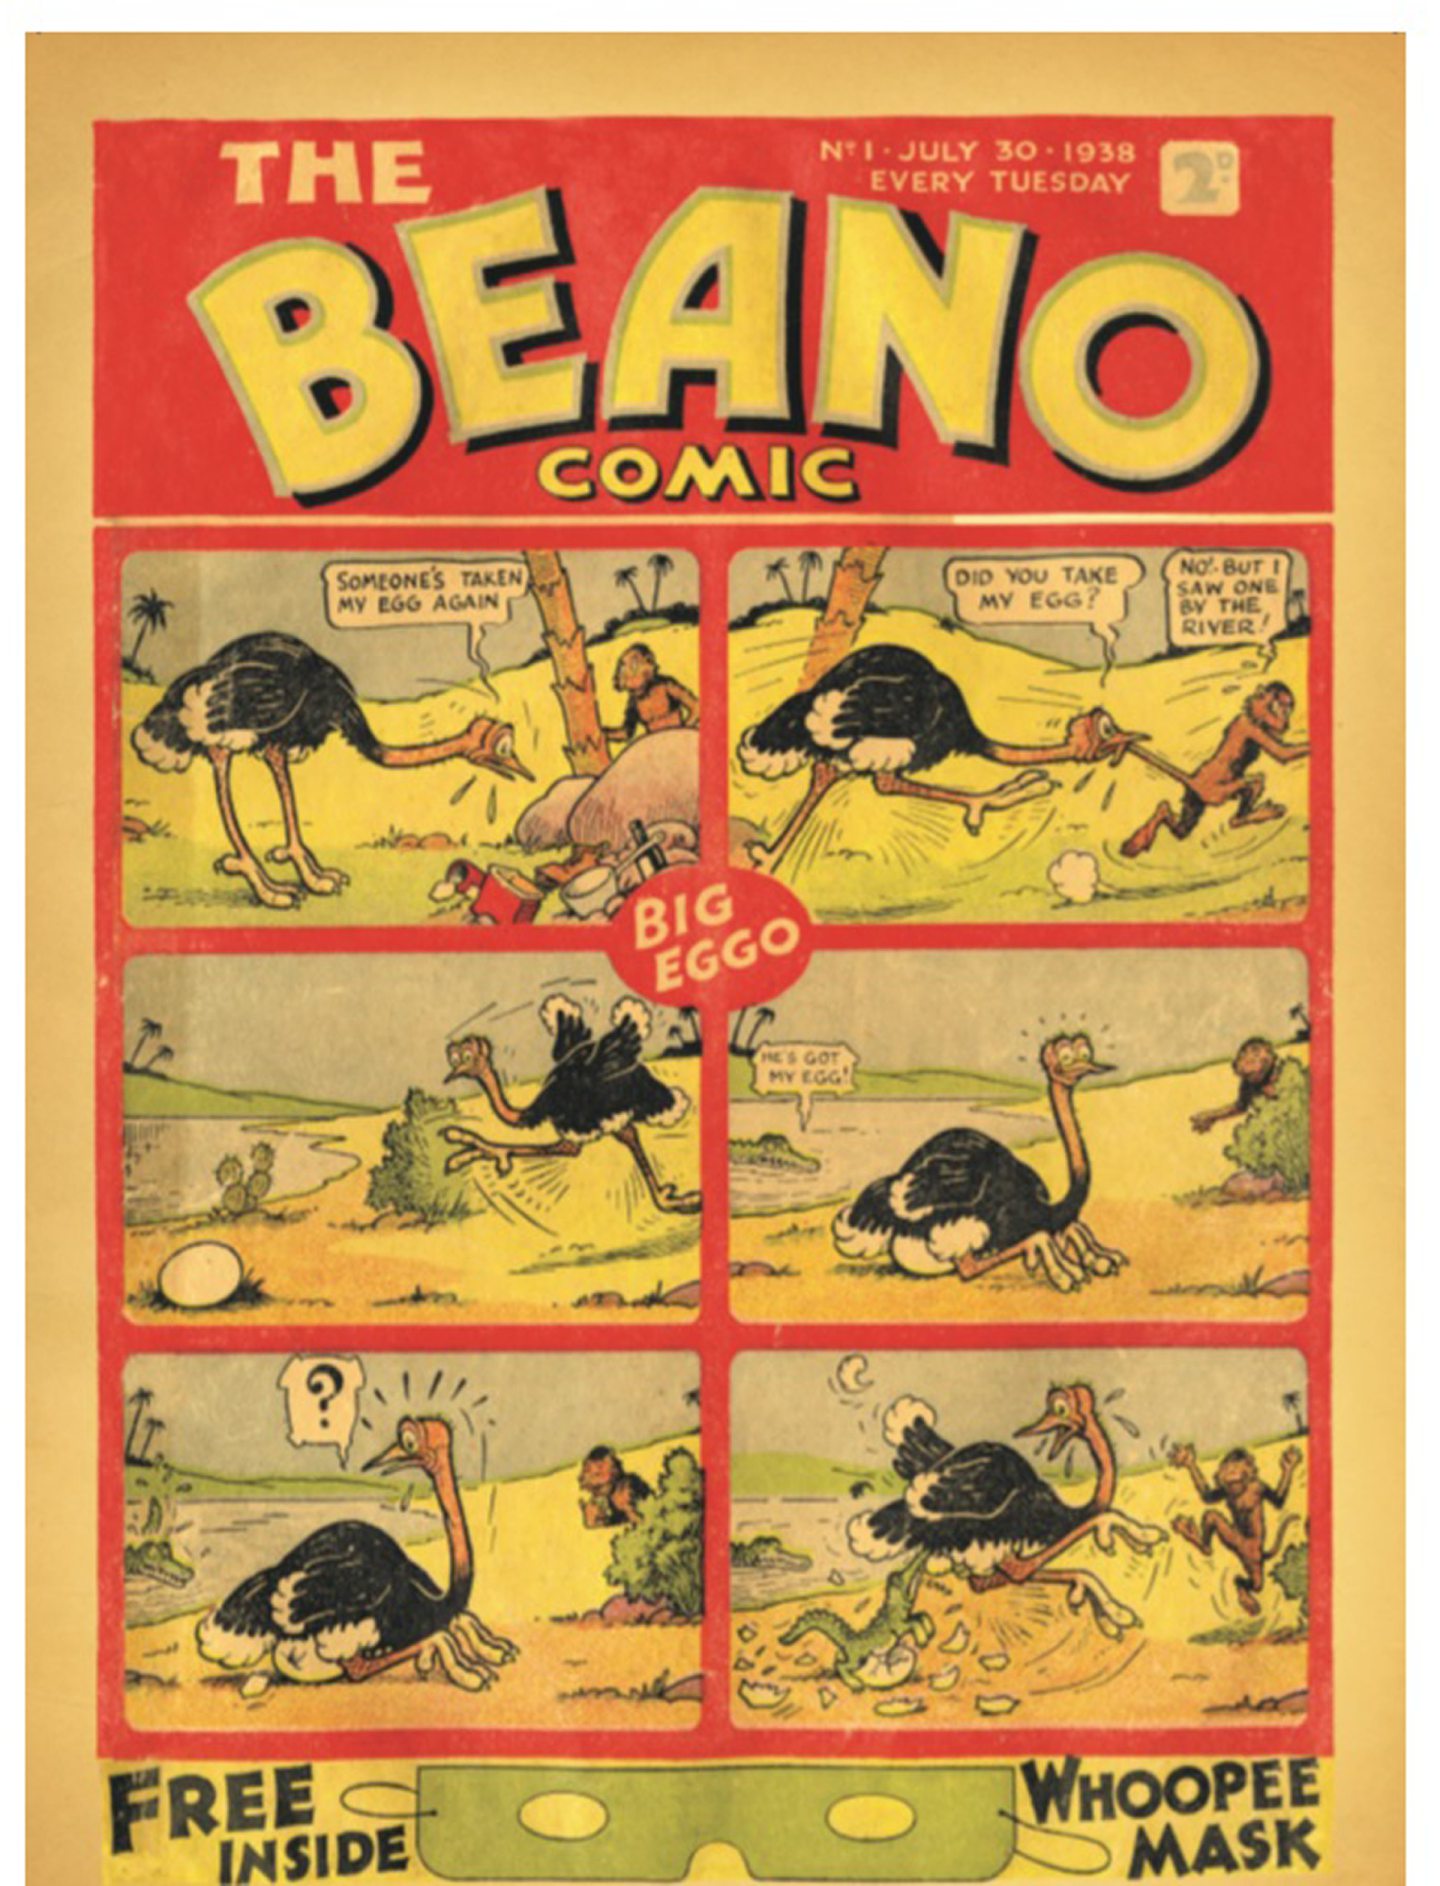 The first edition of The Beano featured Big Eggo on the cover and a free whoopee mask. Image: PA.